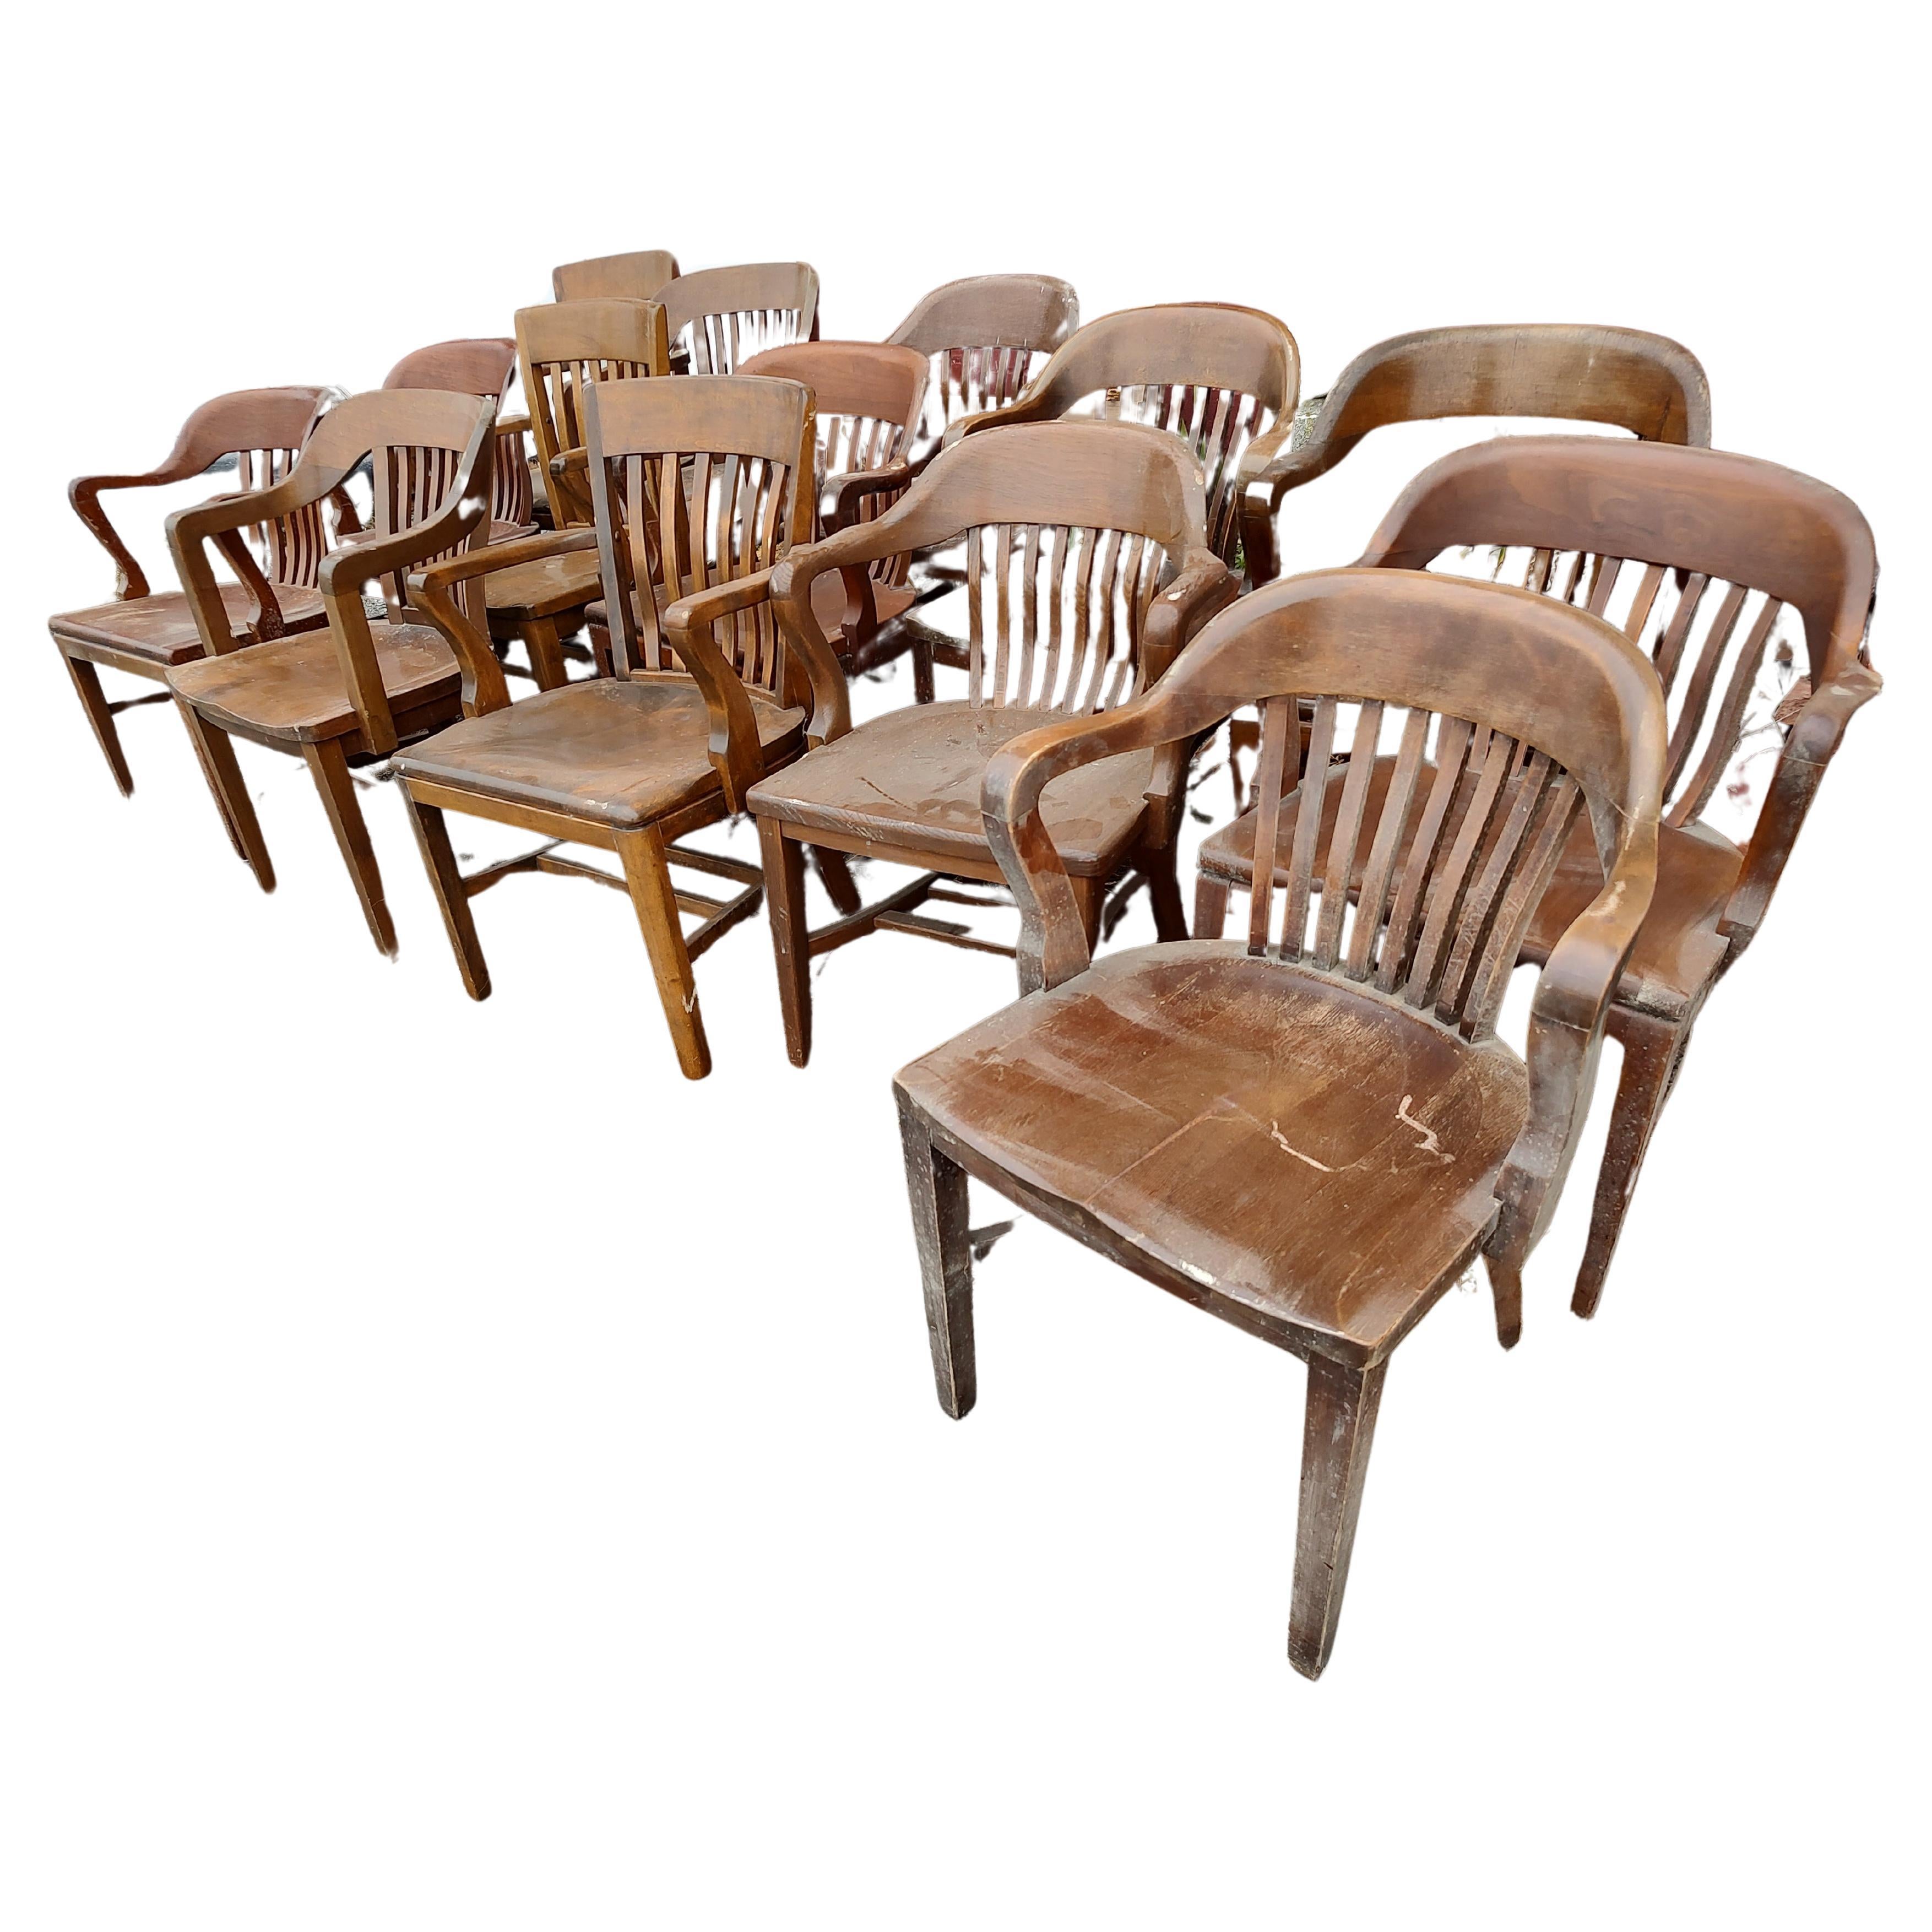 Fabulous collection of hardwood bankers chairs often found in offices, jury rooms, conference centers etc. Created from oak maple and walnut these chairs are heavy duty quality seating, great for a dining area. 3 chairs available and have some